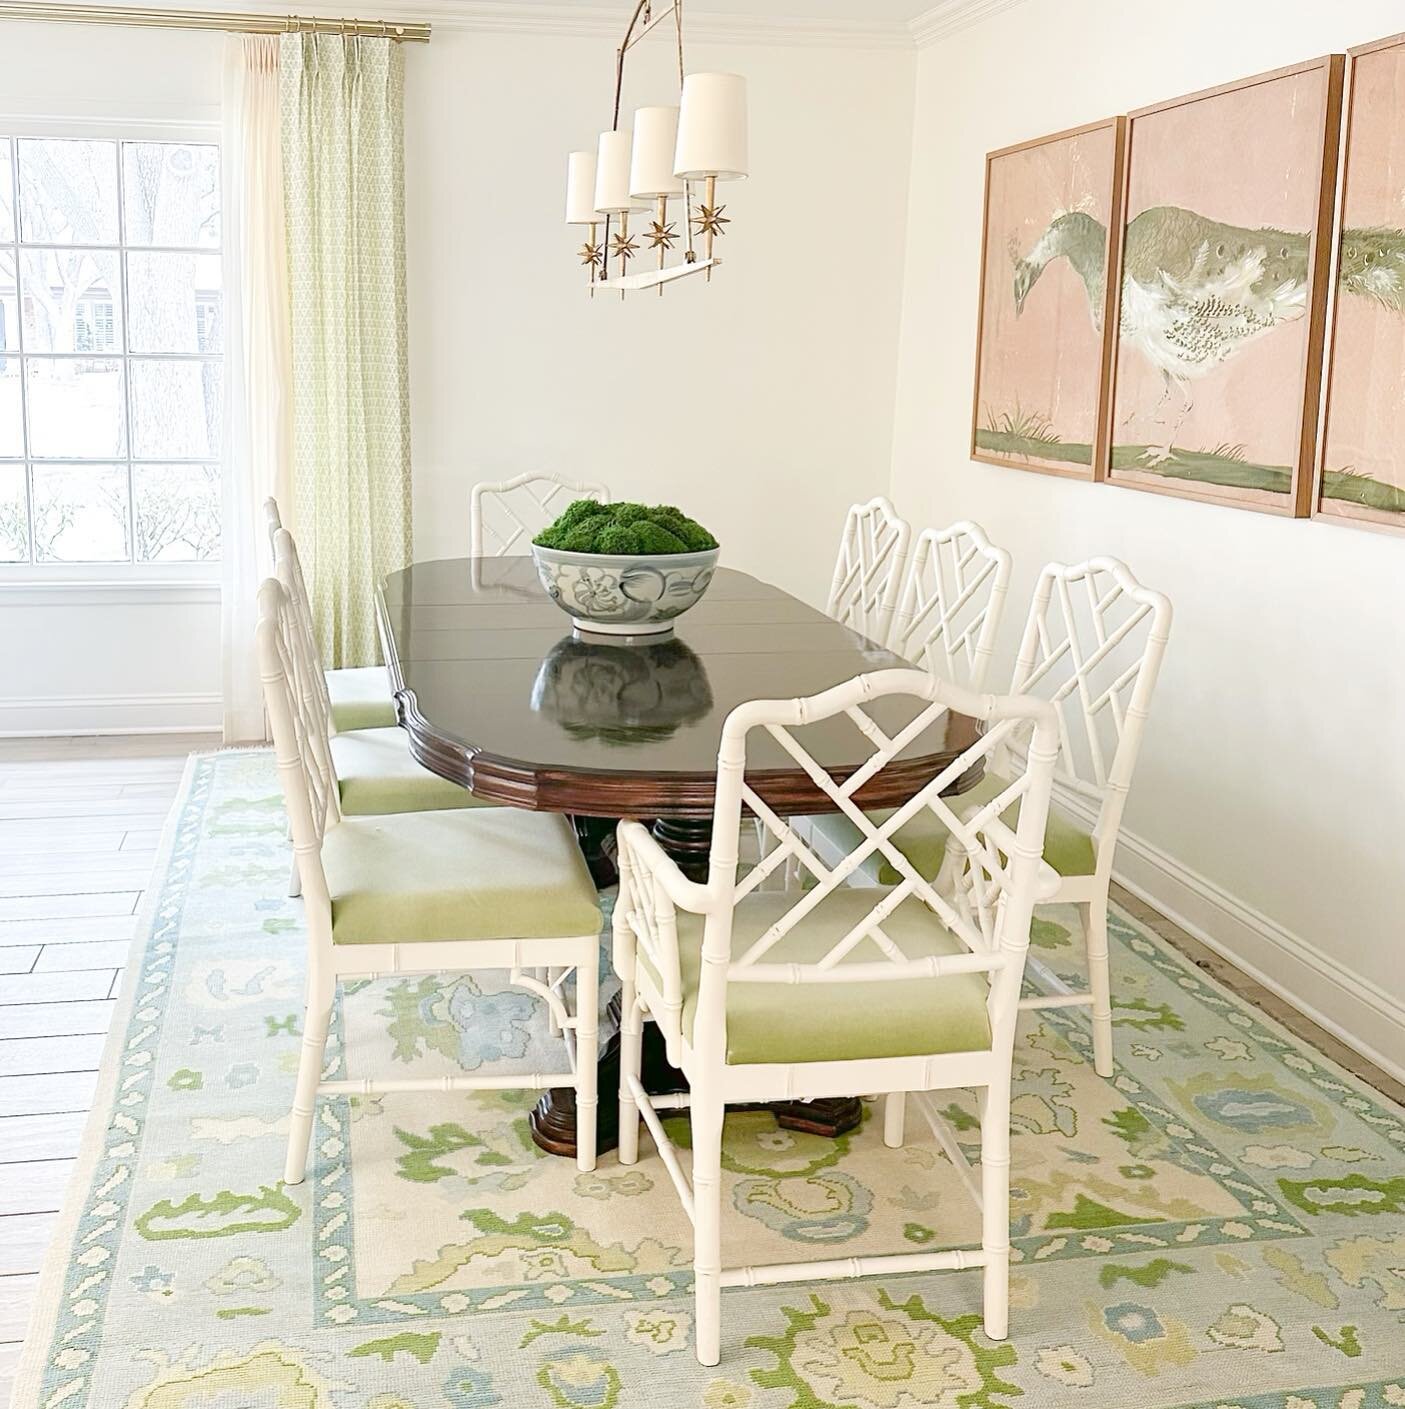 Making this dining room pop with shades of green and blue! 💙💚